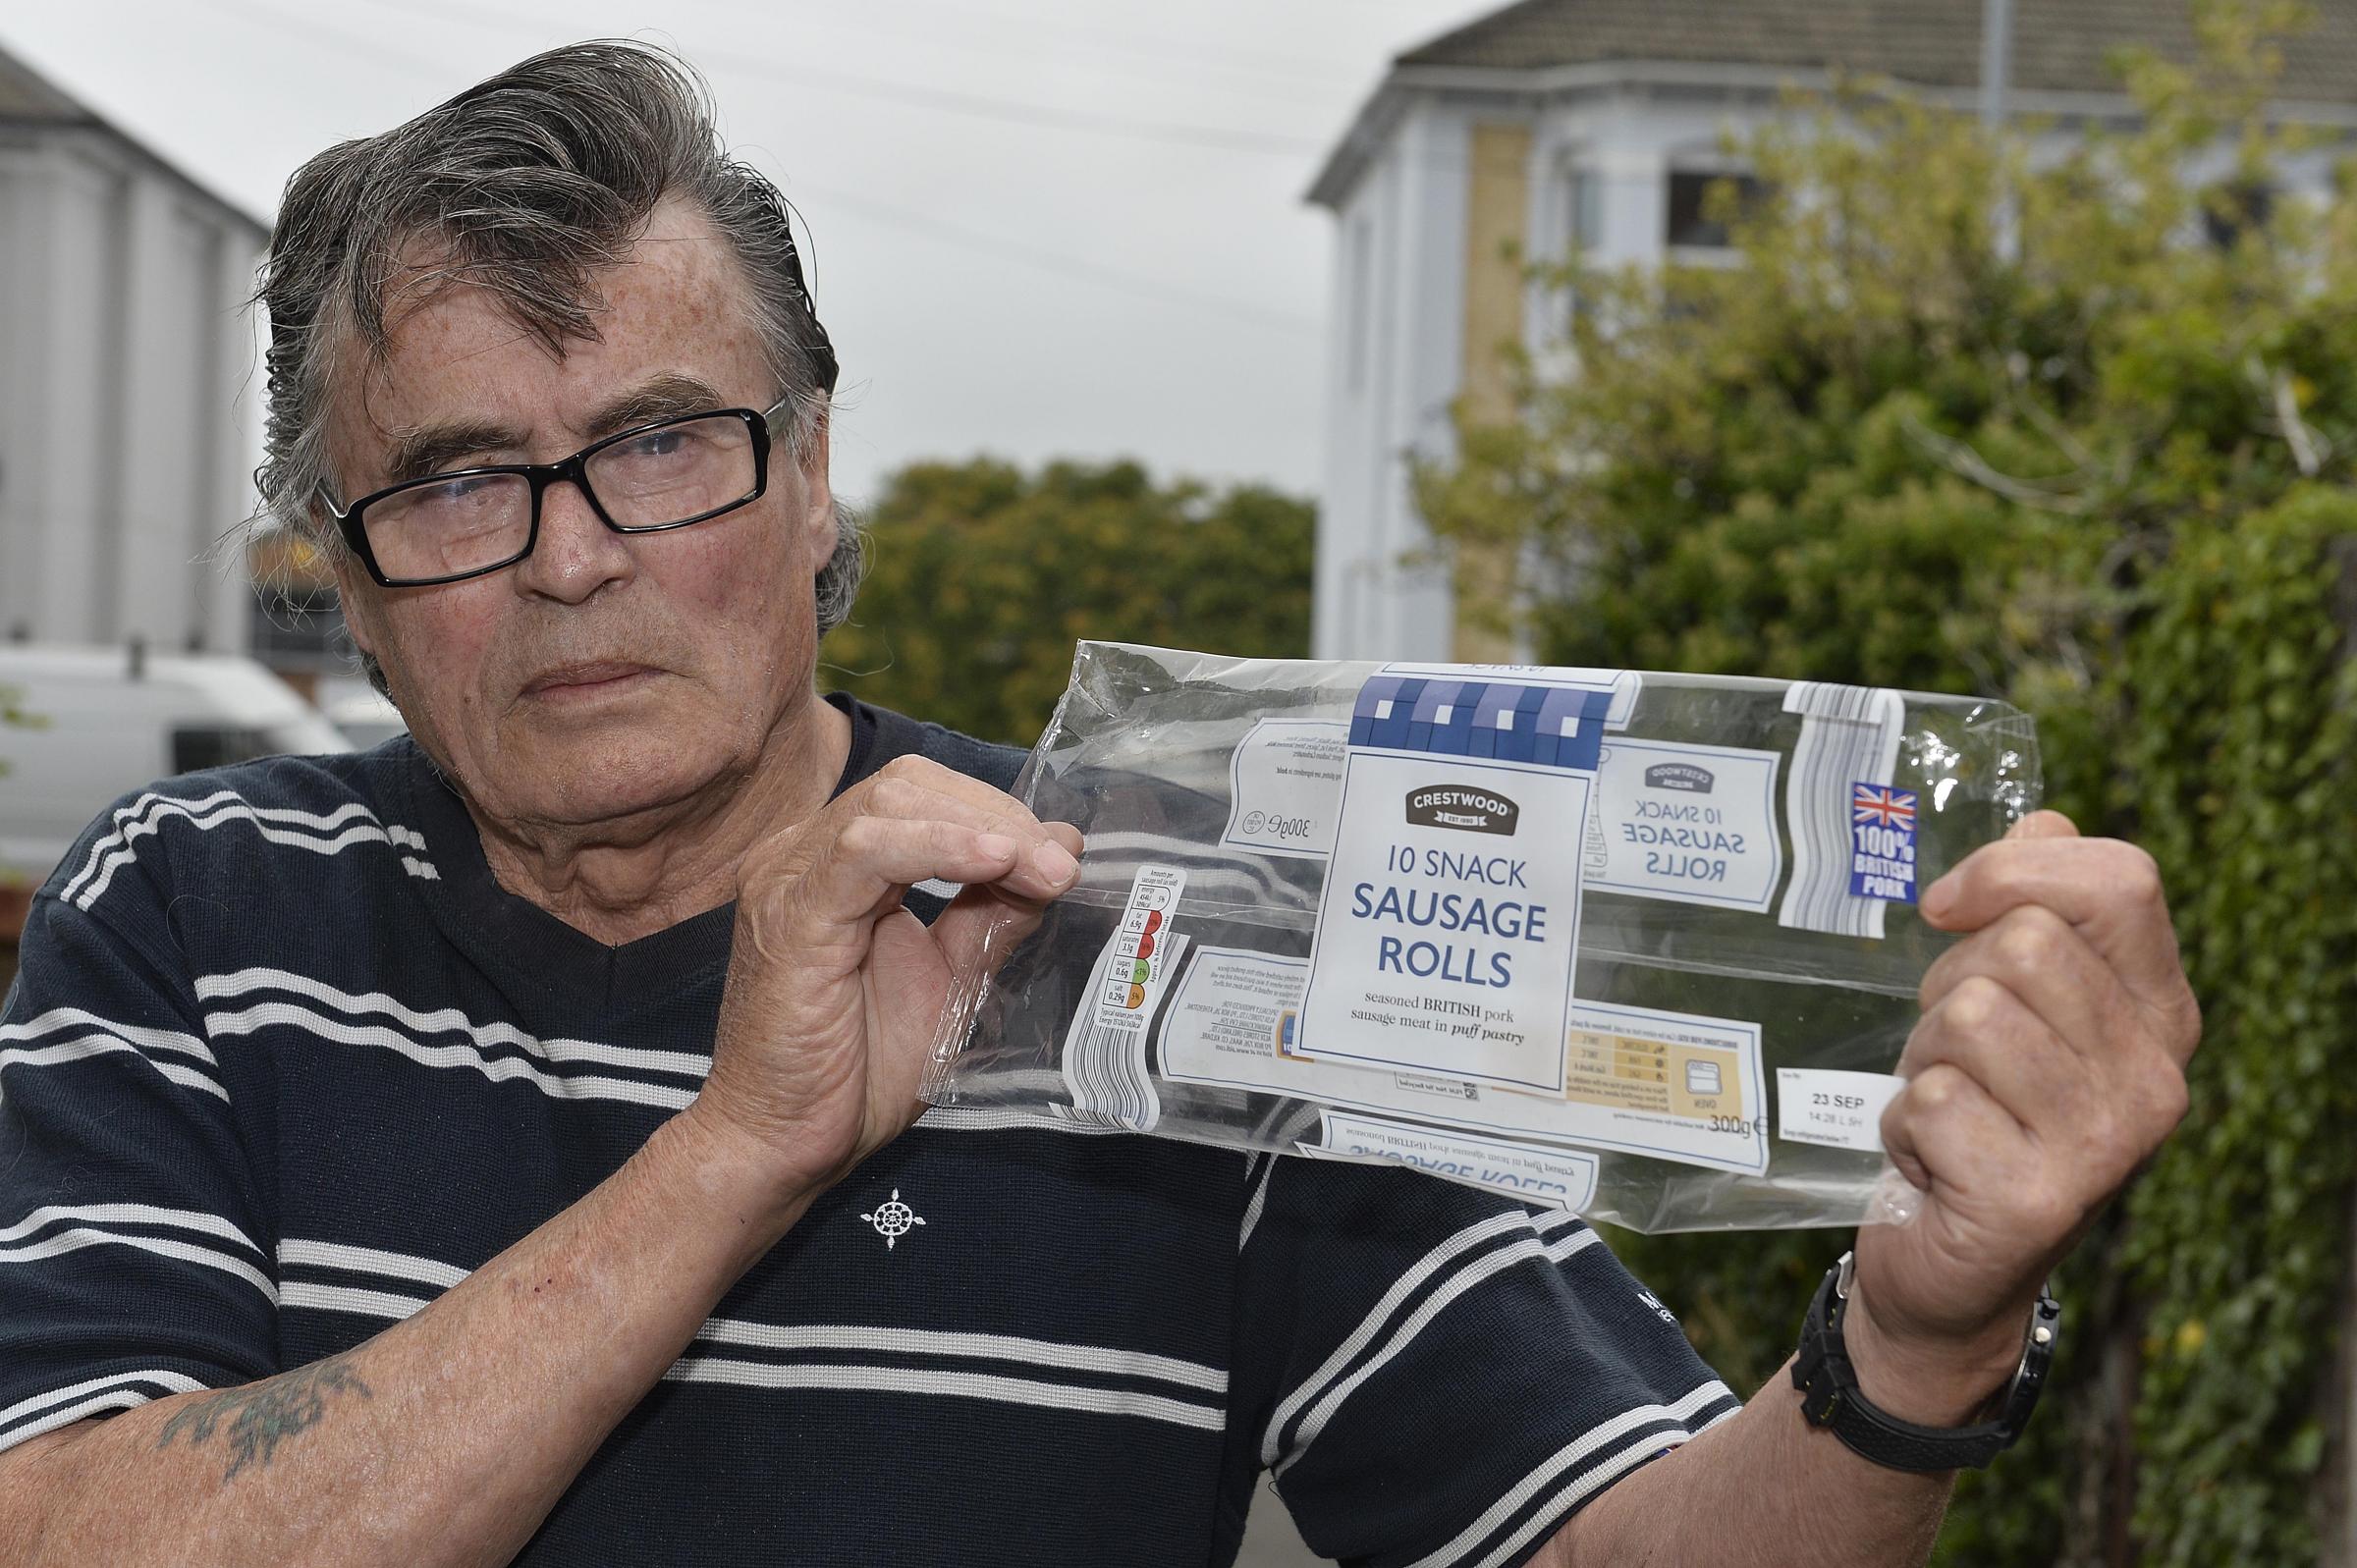 Pensioner who eats TEN sausage rolls a day furious to find pack contained only 9